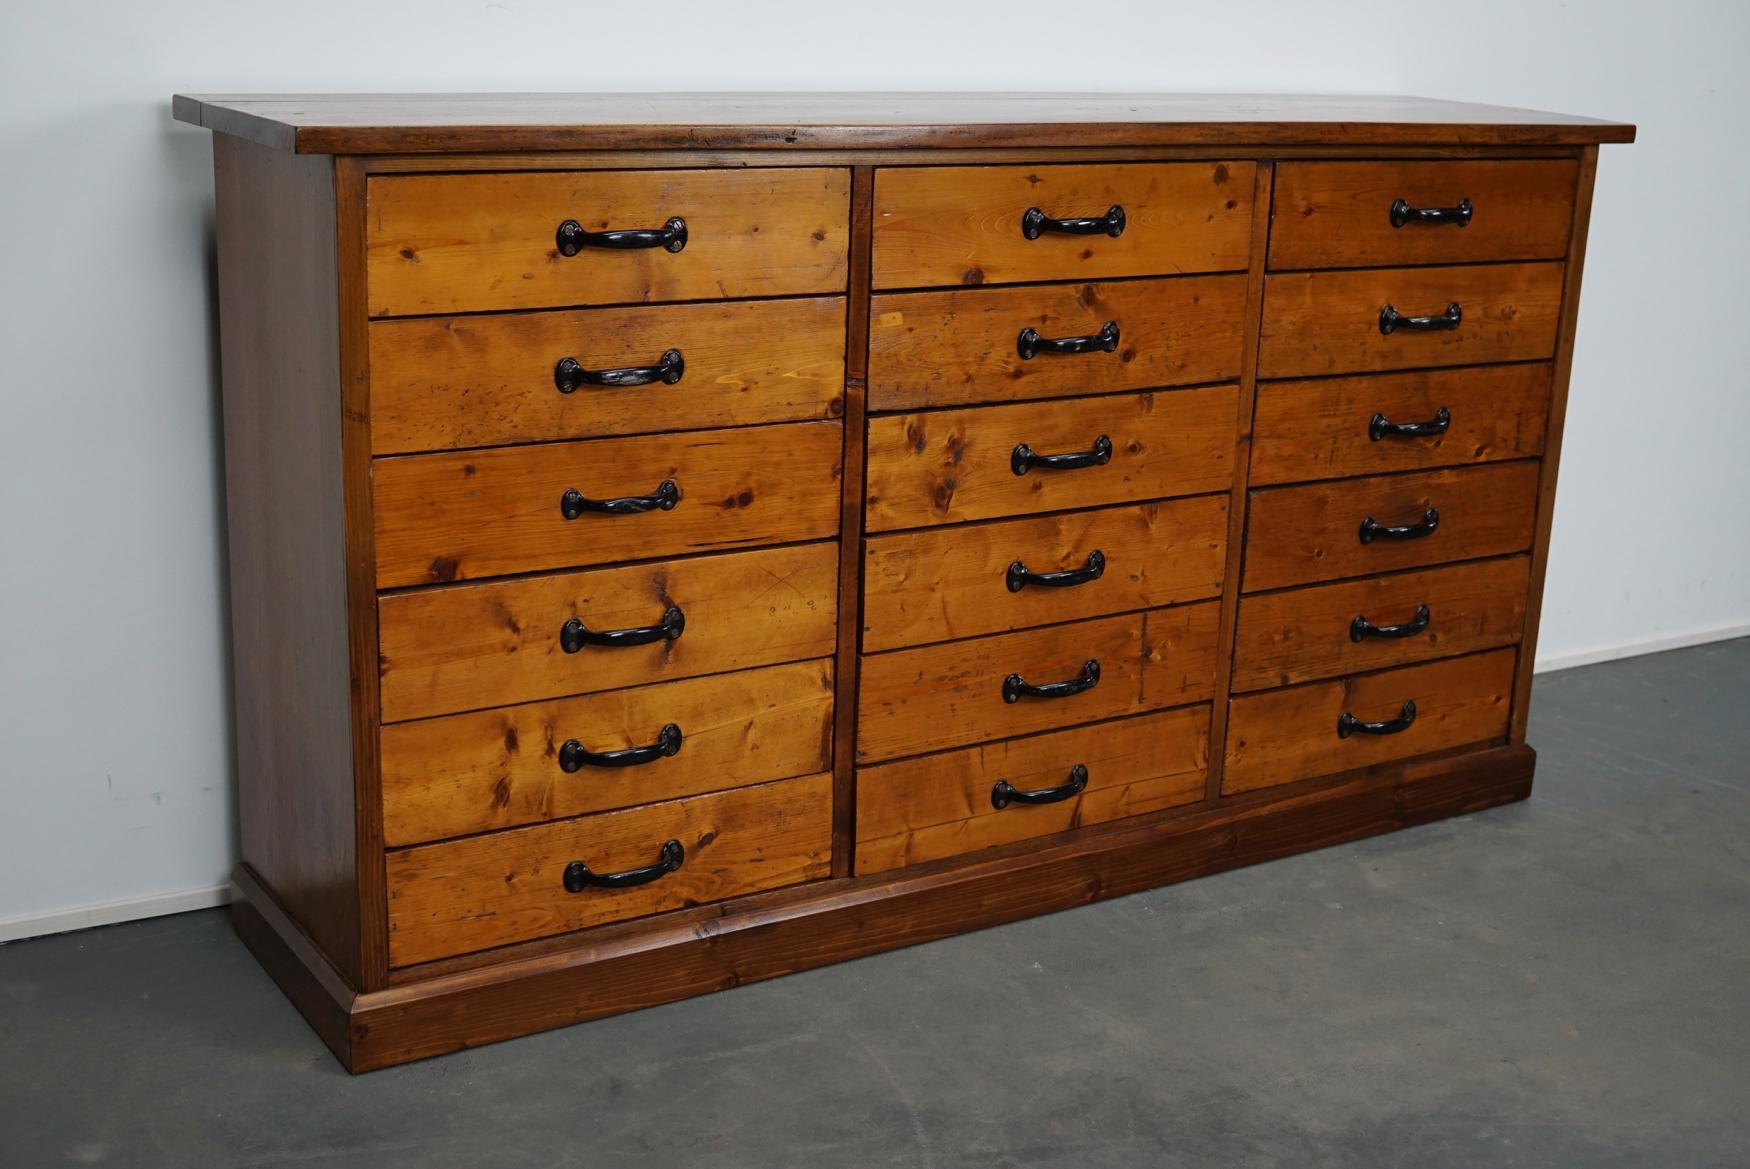 This apothecary cabinet of drawers was designed, circa 1950s in Germany. The piece is made from pine and features 18 drawers with metal hardware. The interior dimensions of the drawers are: D 29.5 x W 44 x H 10 cm.